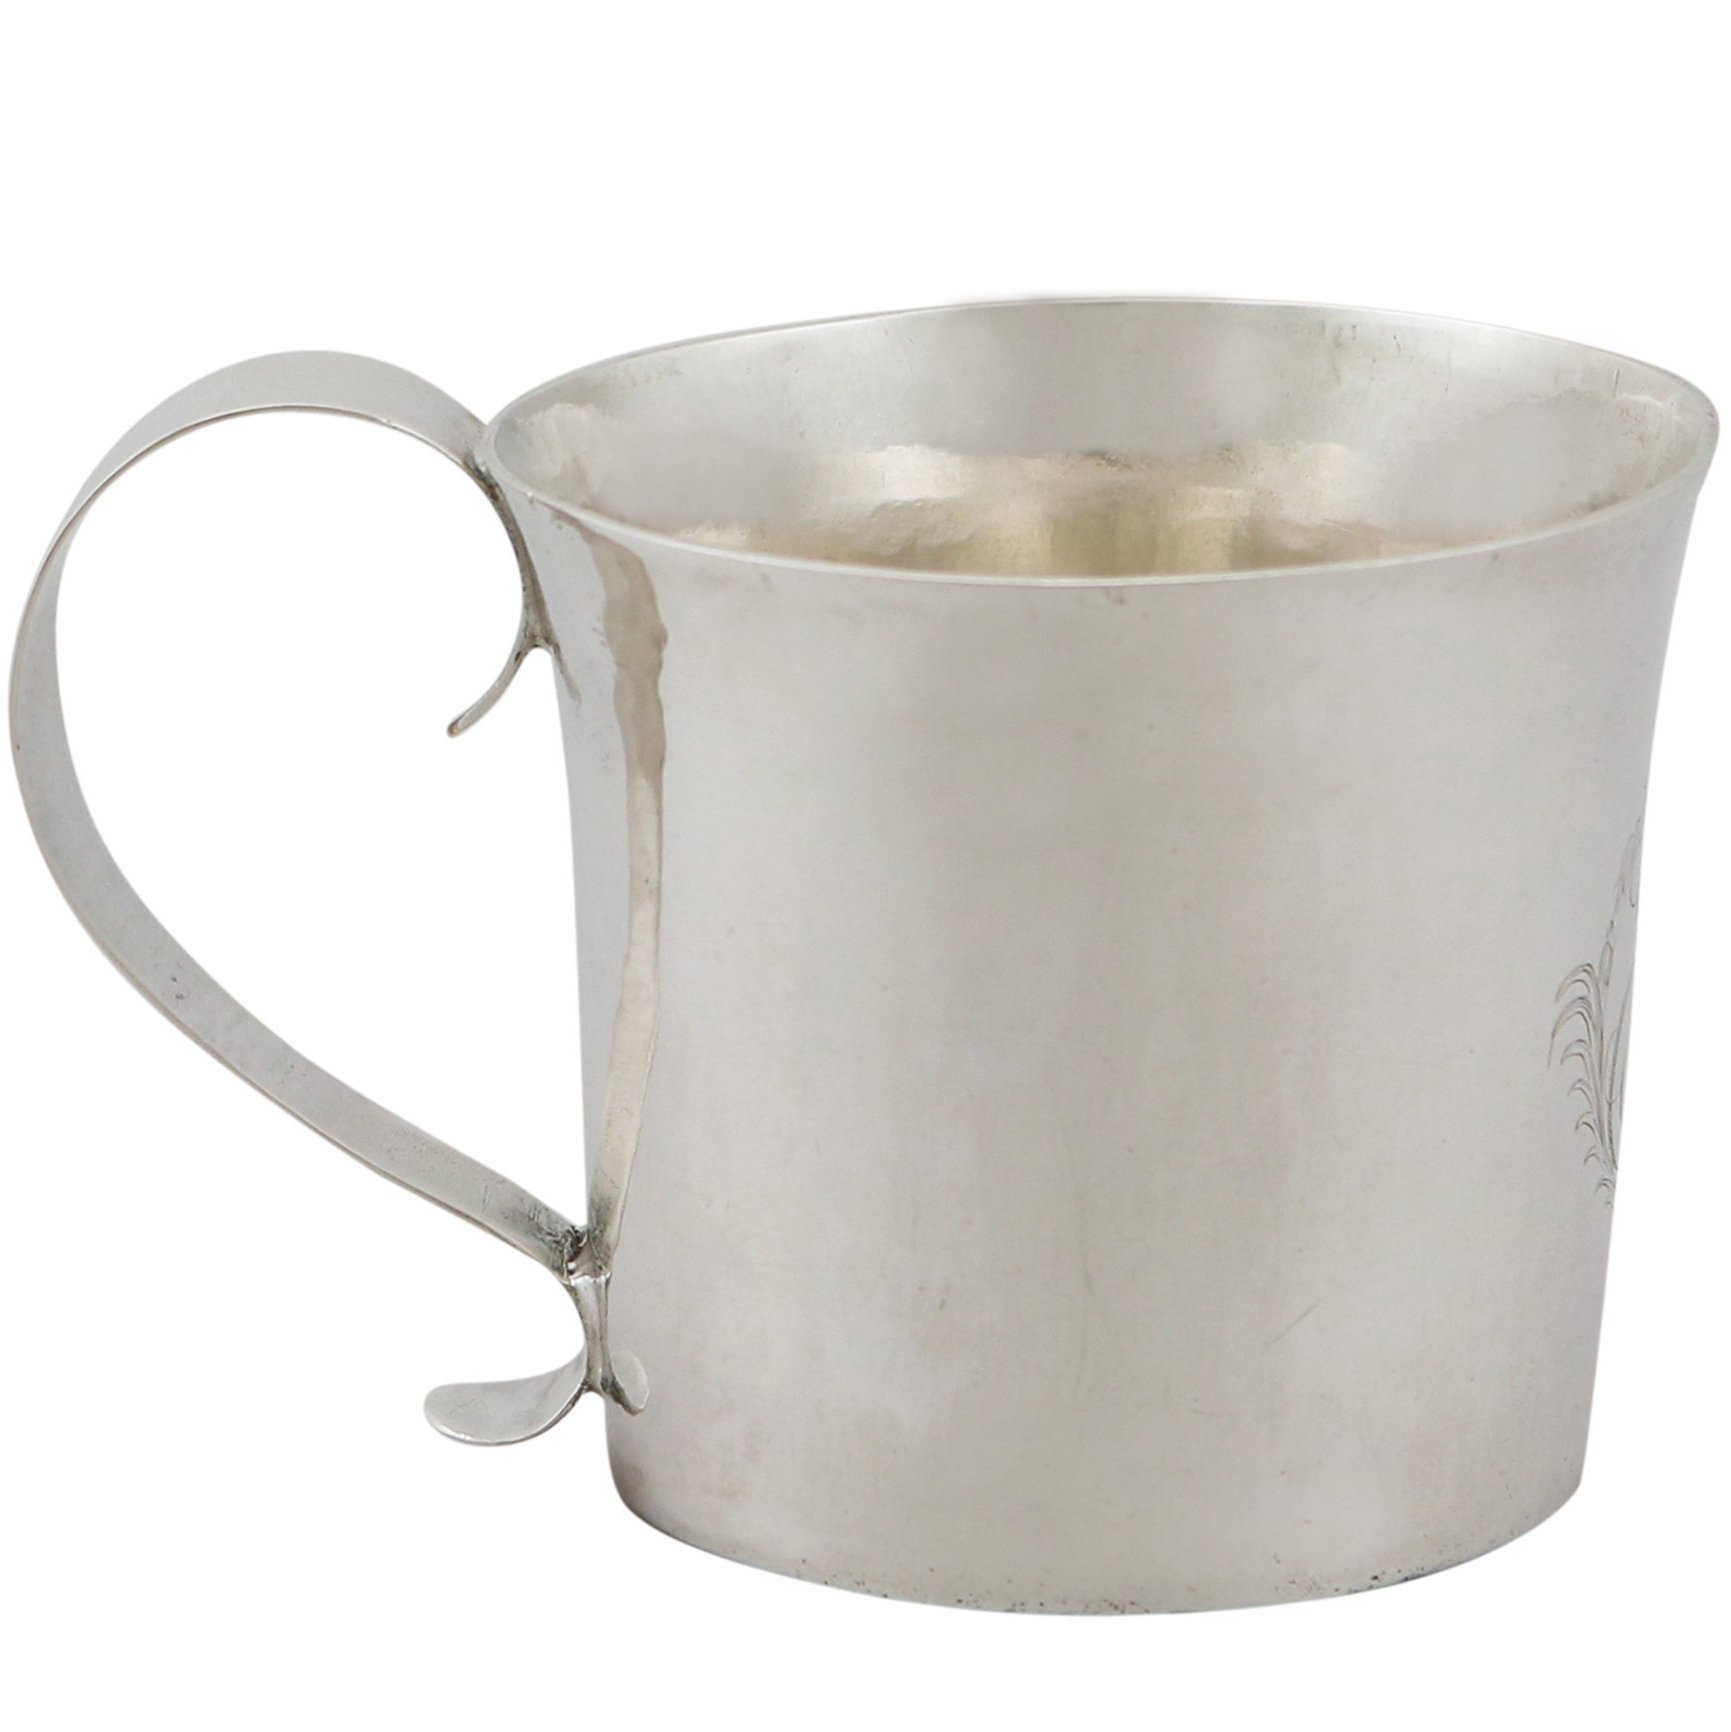 Antique Sterling Silver Mug, 1885, Langford and Sons For Sale at 1stdibs